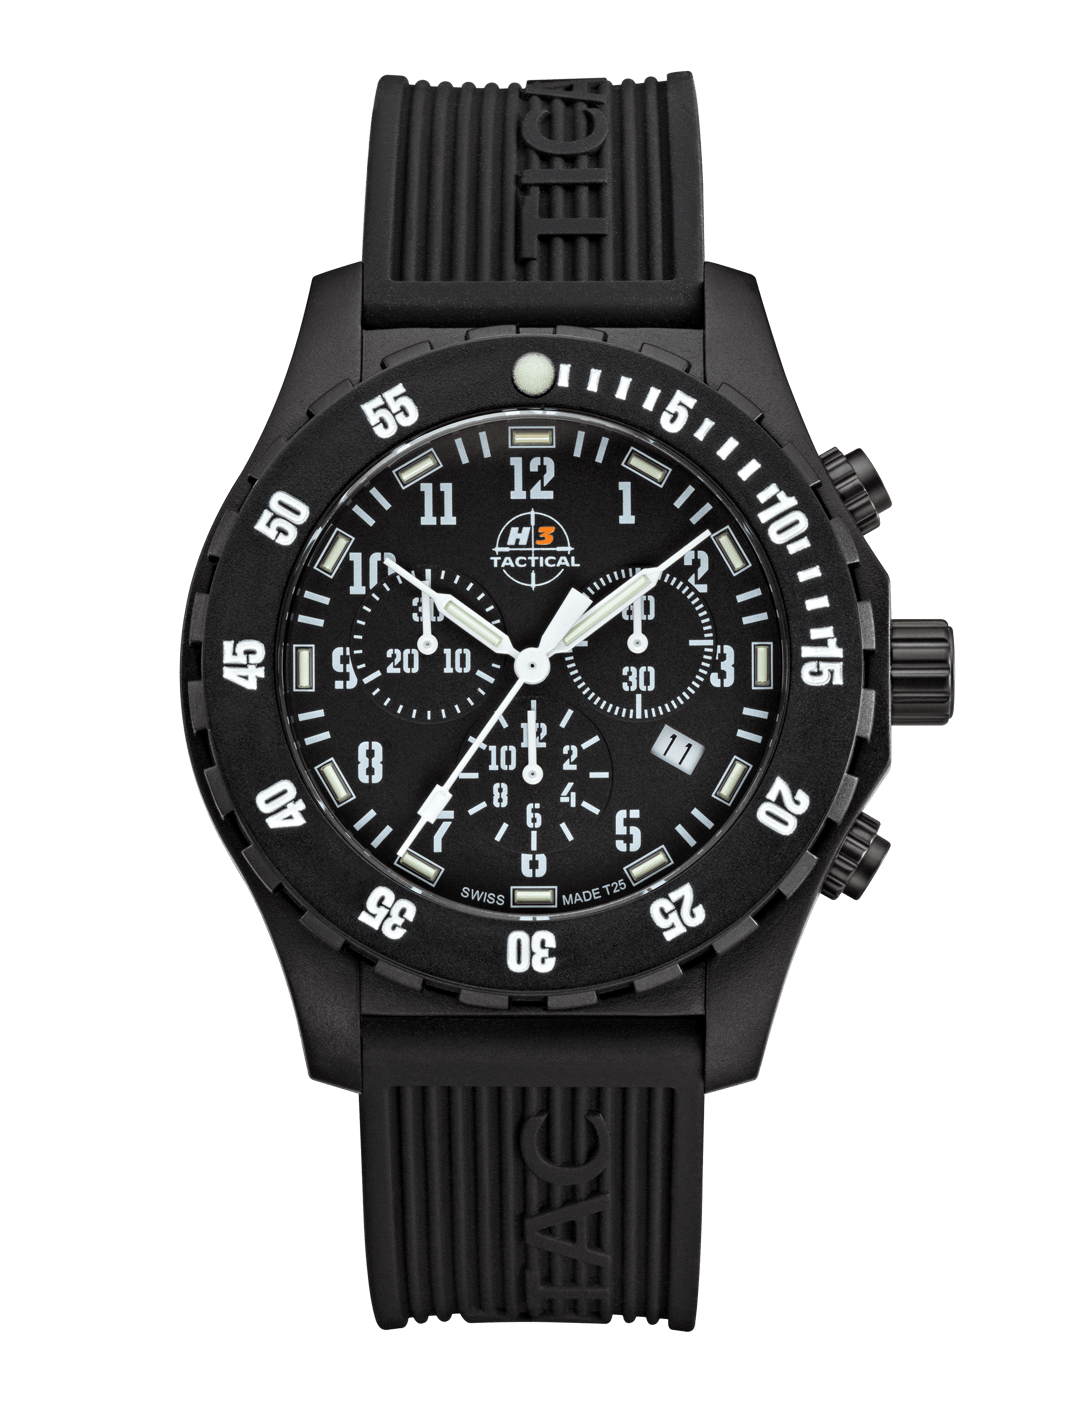 H3TACTICAL Trooper Carbon White Chronograph H3 Uhr mit Silikonband